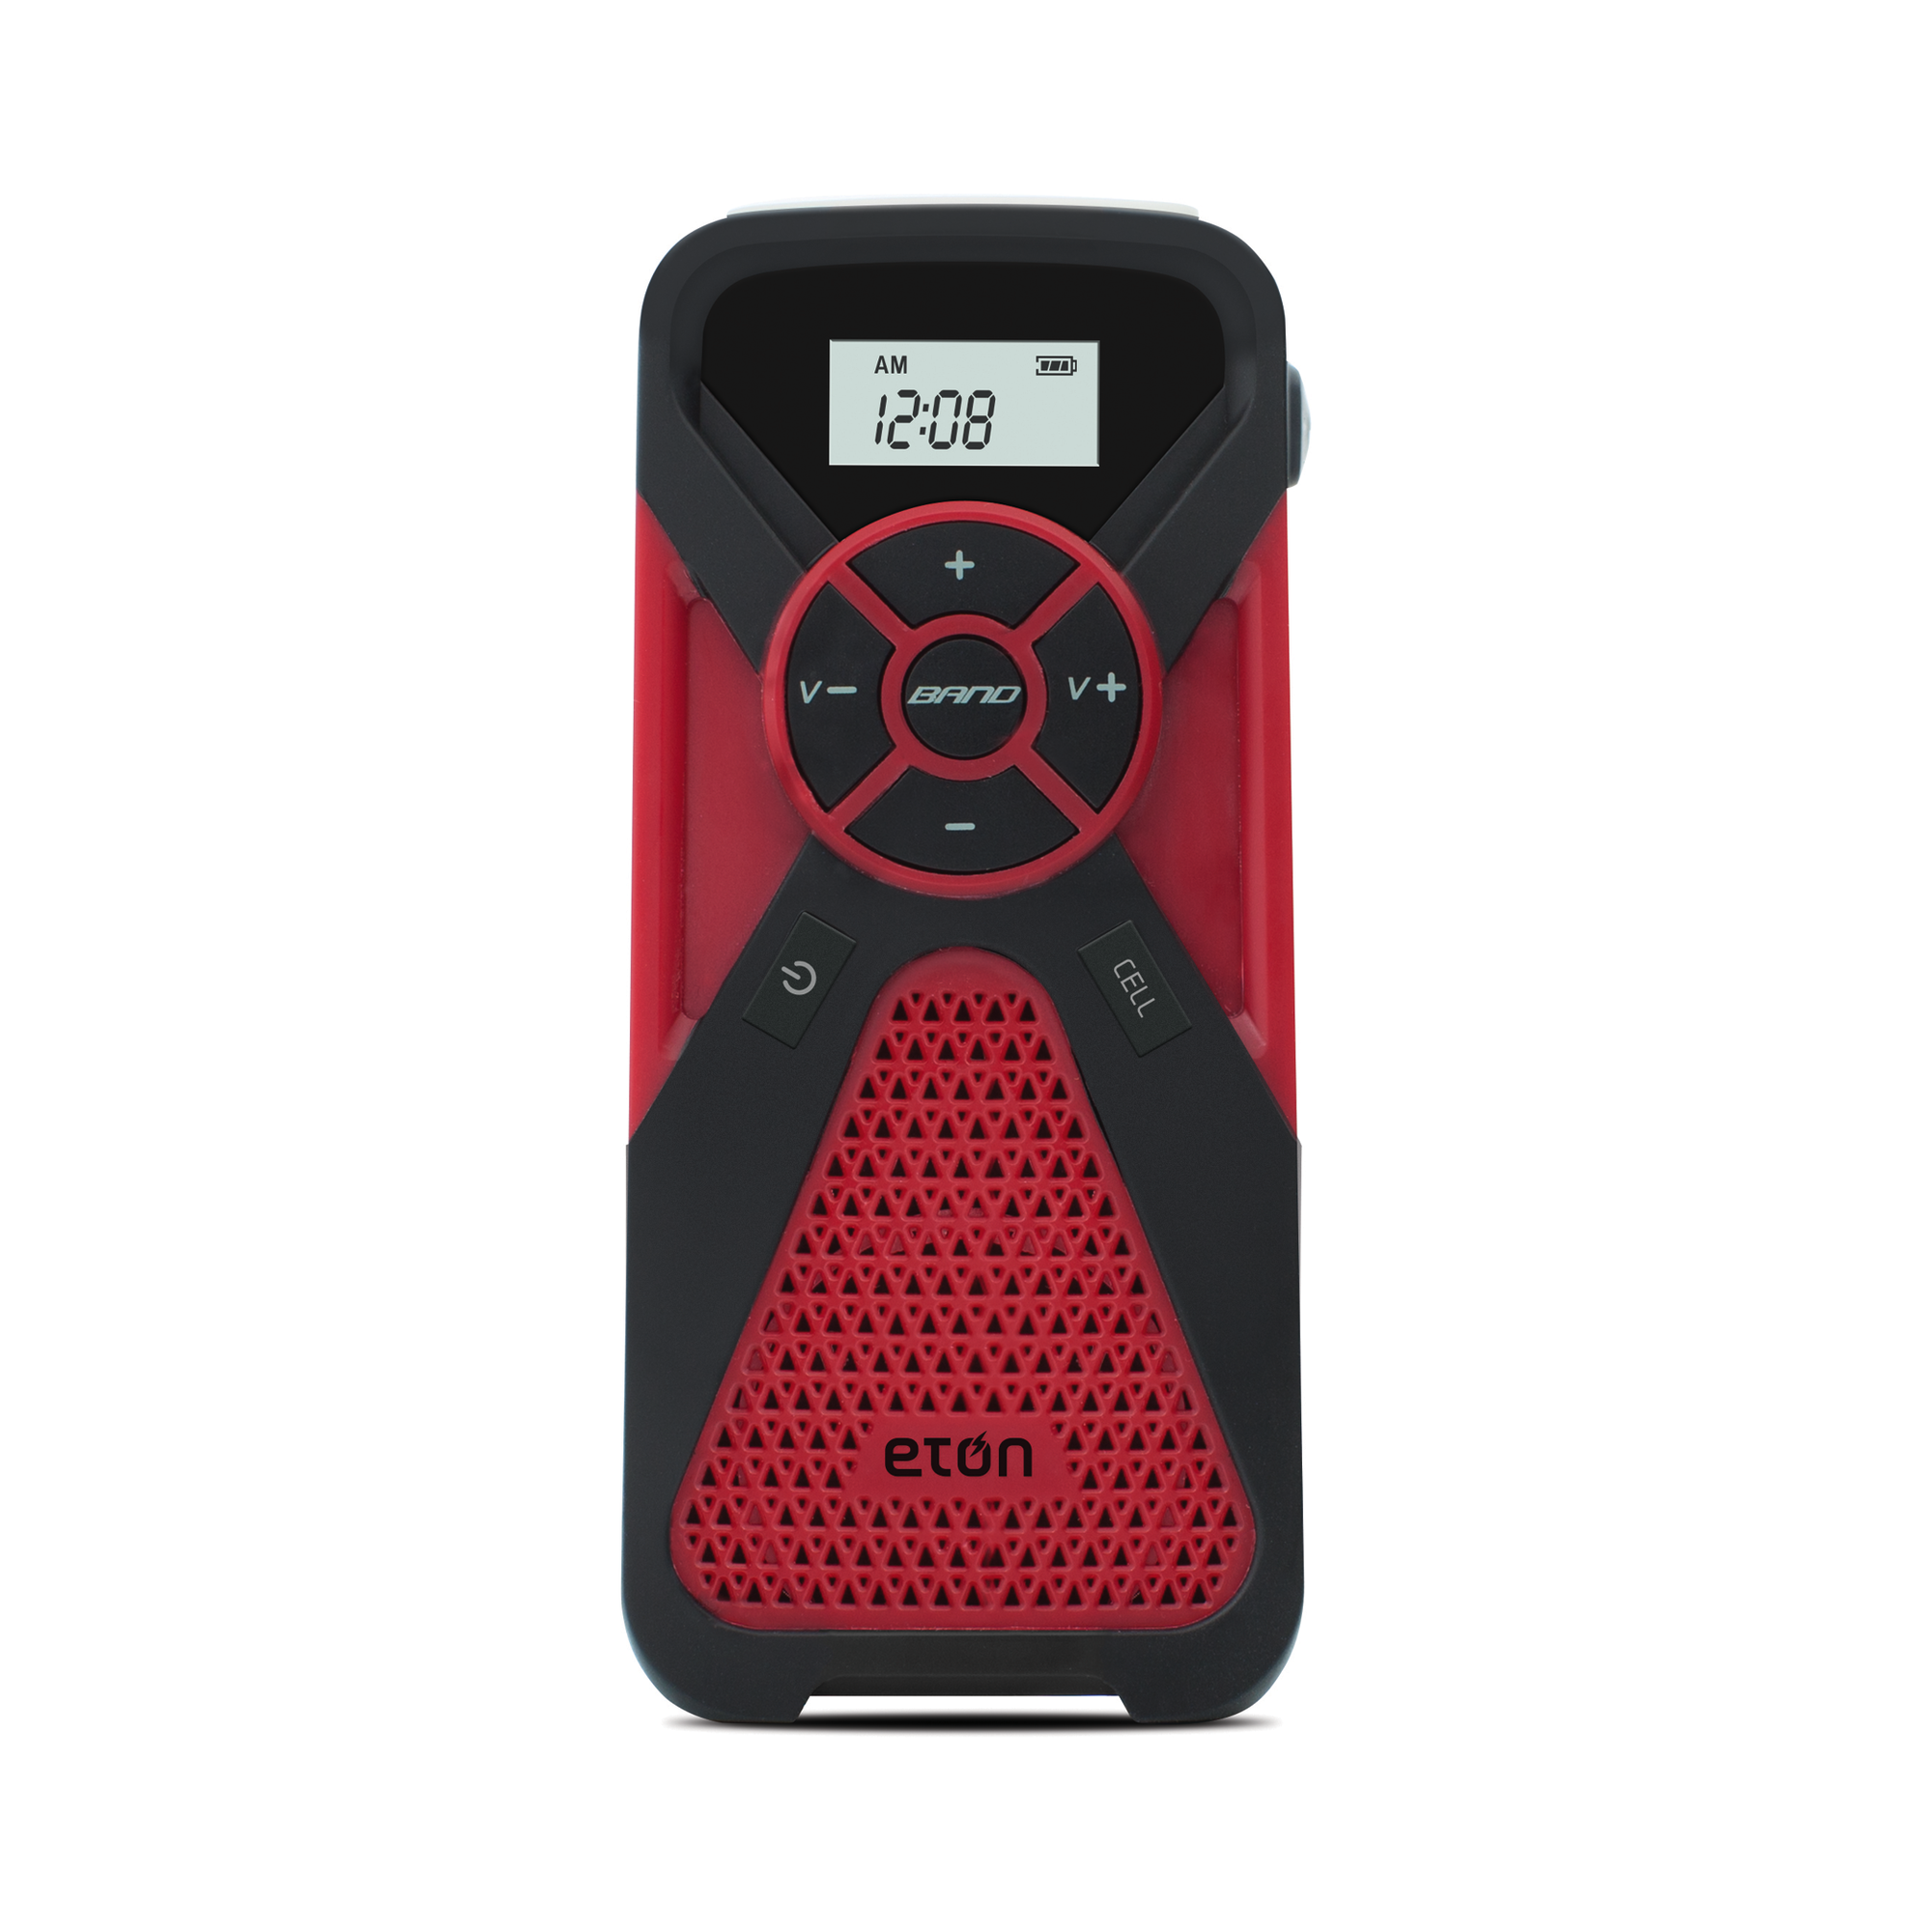 Eton- American Red Cross FR1 Multi-Power Charger, and Flashlight